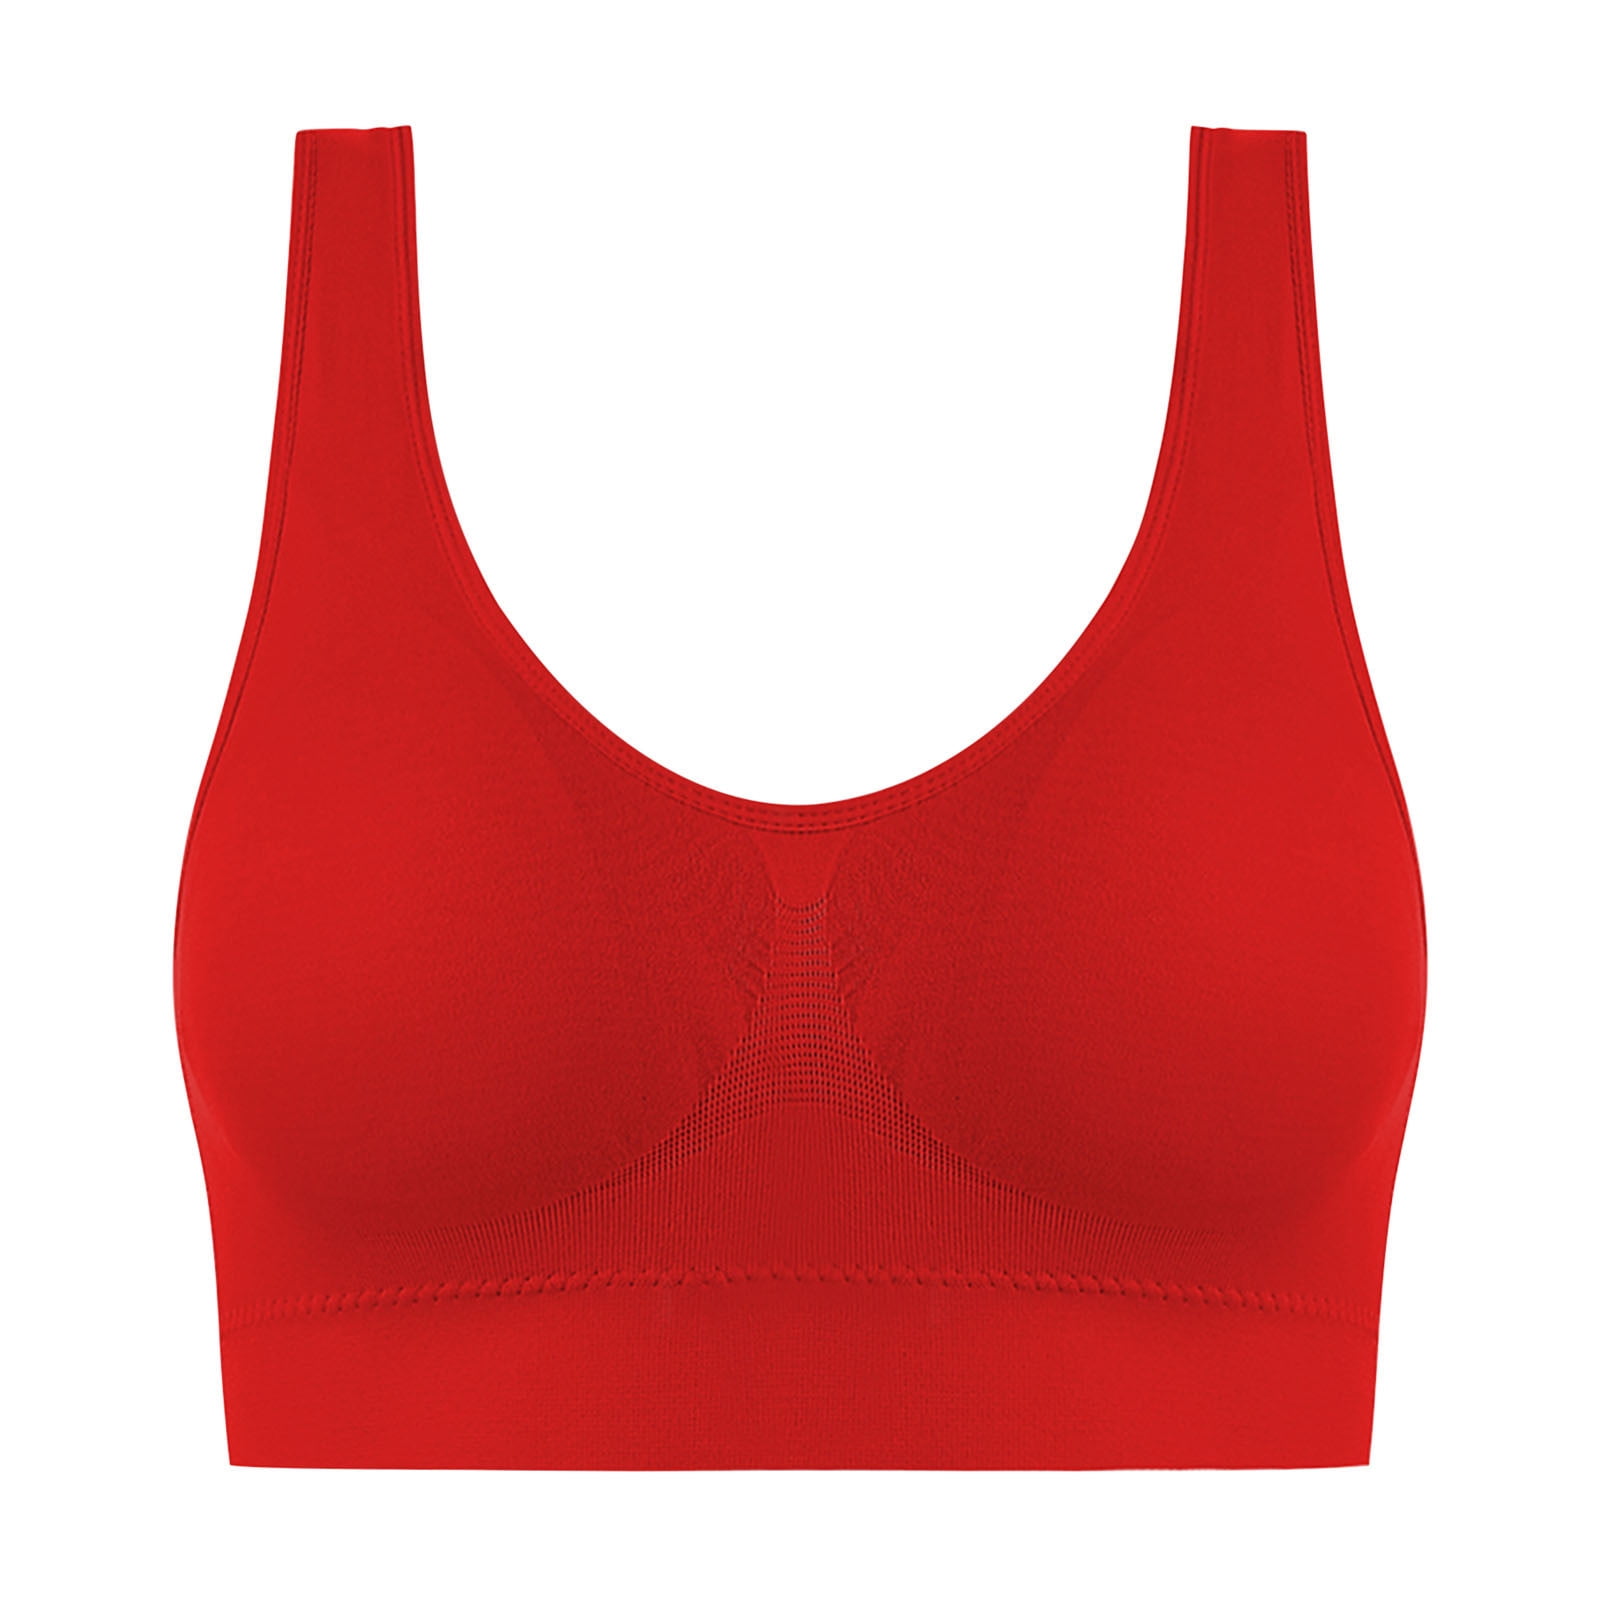 Deagia Clearance Brassiere for Women Push up Daily Plus Size Vest Crop Wire  Free Bra Lingerie V-Neck Underwear S-3XL Perfect Shape Padding Bra XL #4034  